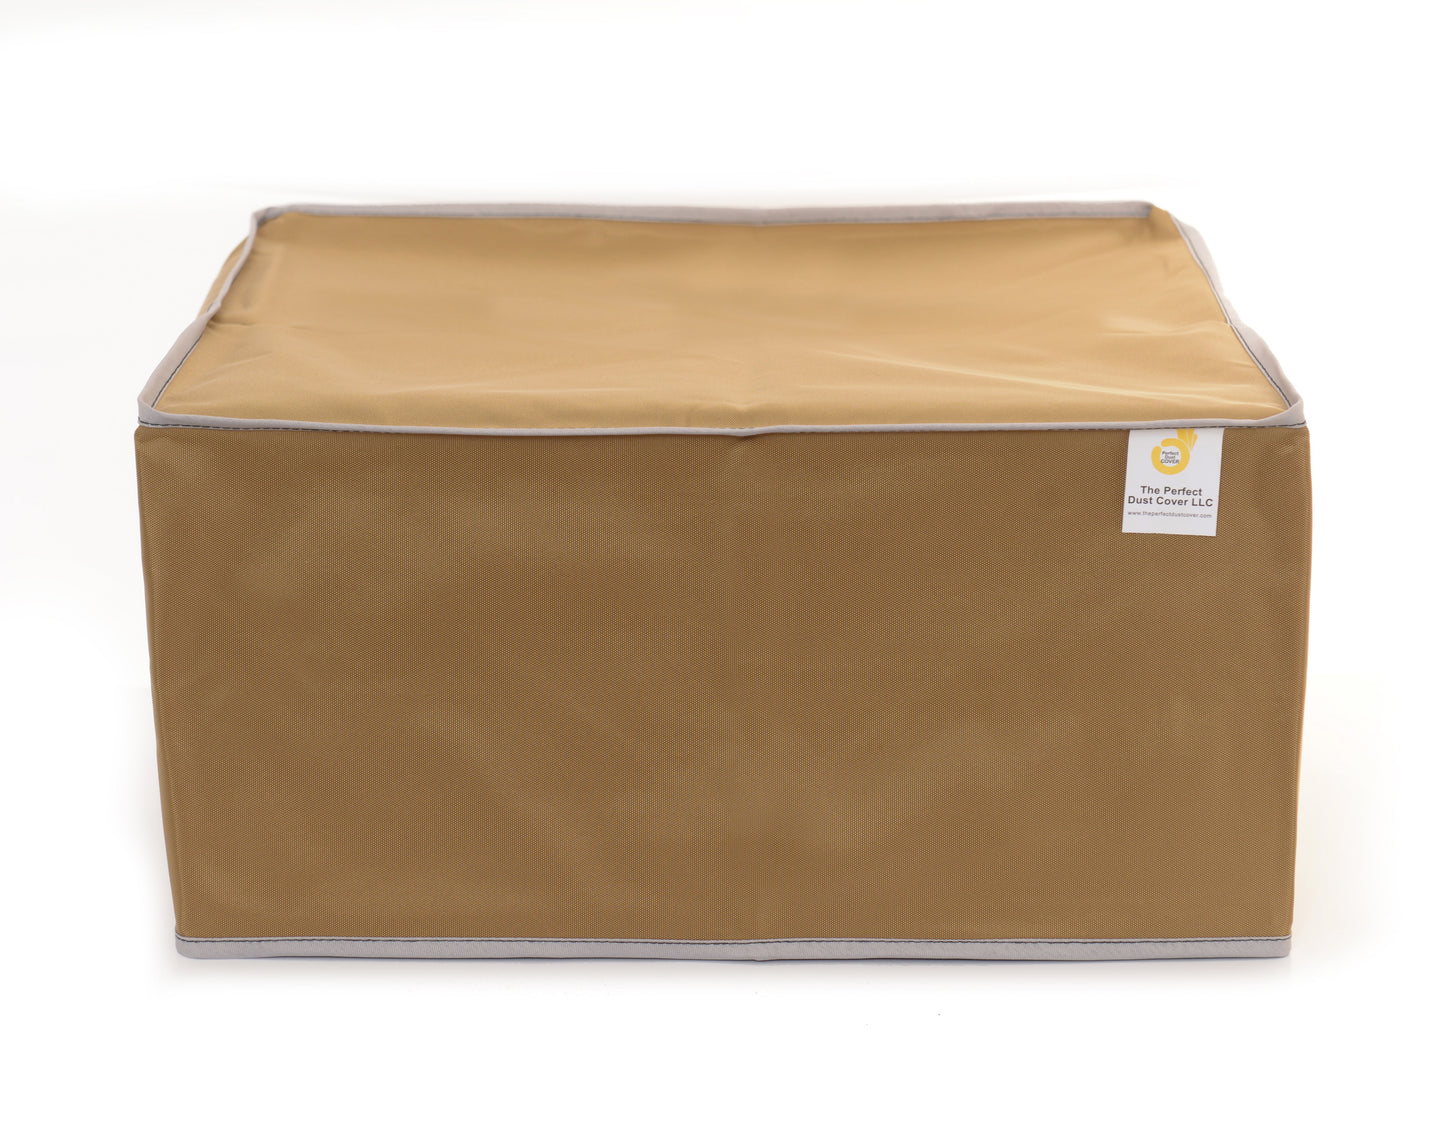 The Perfect Dust Cover, Tan Nylon Cover for HP DesignJet T530 24-in Wide Format Printer, Anti Static, Waterproof Cover Dimensions 38.9''W x 20.9''D x 36''H by The Perfect Dust Cover LLC